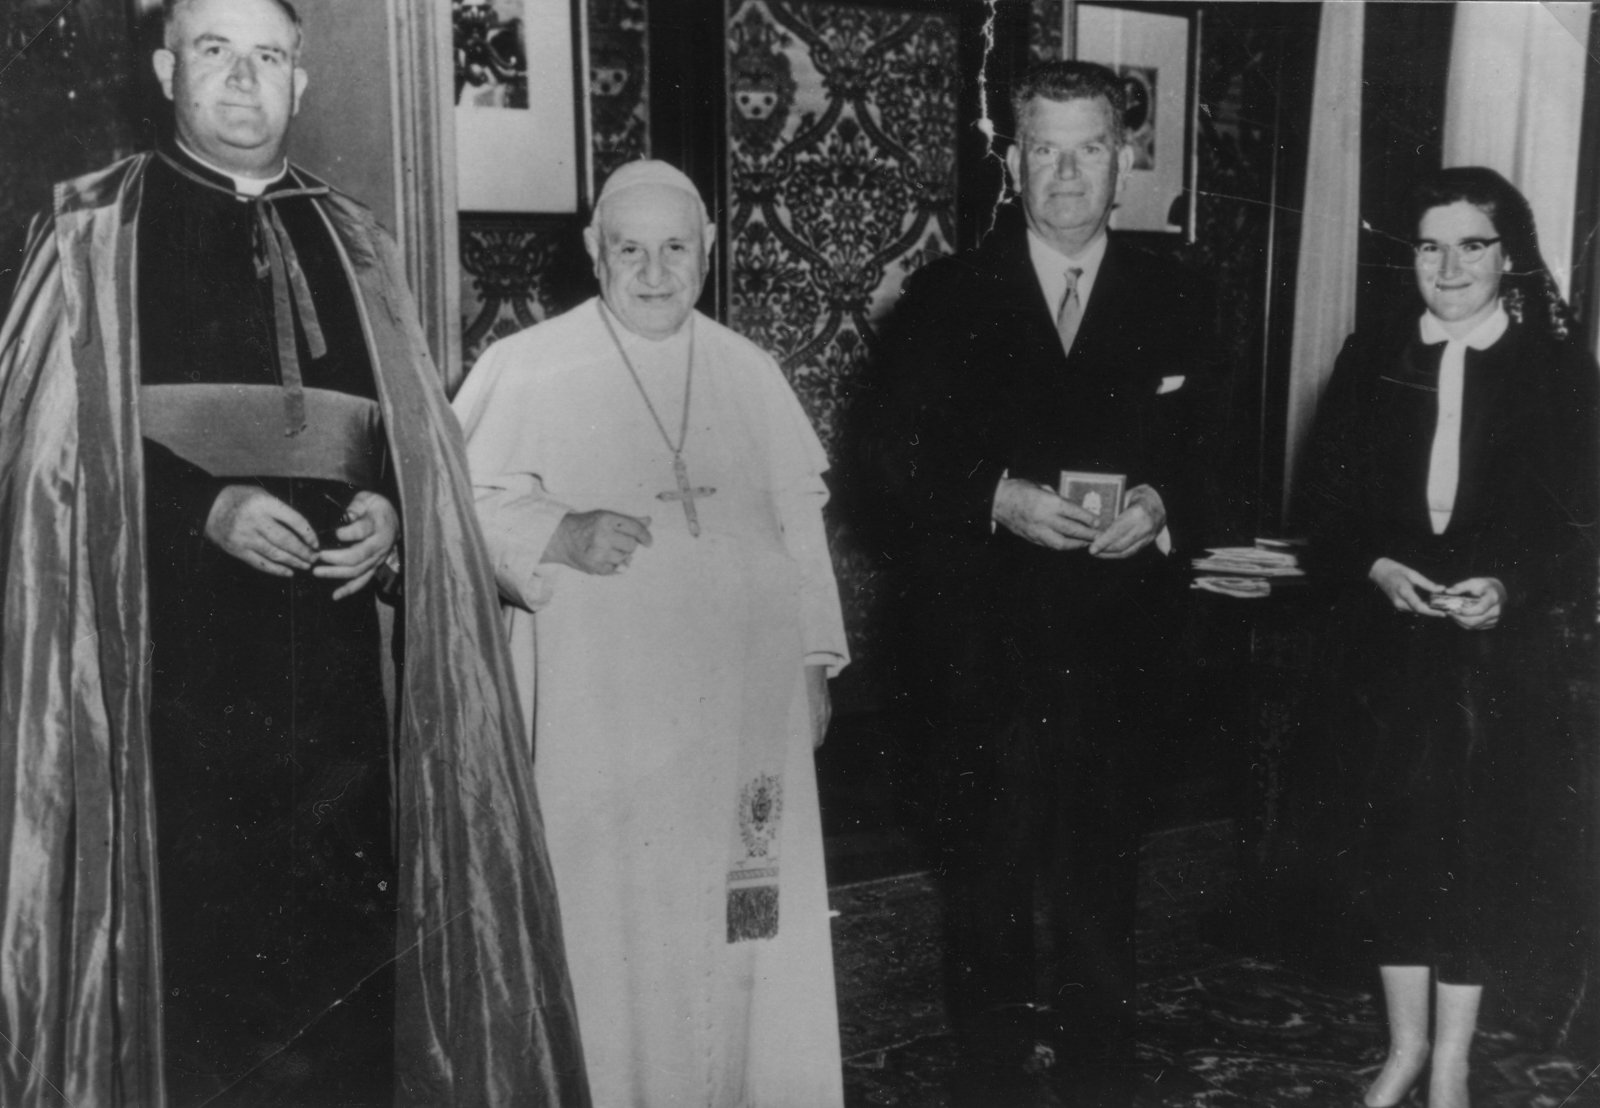 Senator Sean O’Donovan with Pope John XXIII. On the right is his daughter, Fionnuala O’Donovan (later Crowley).